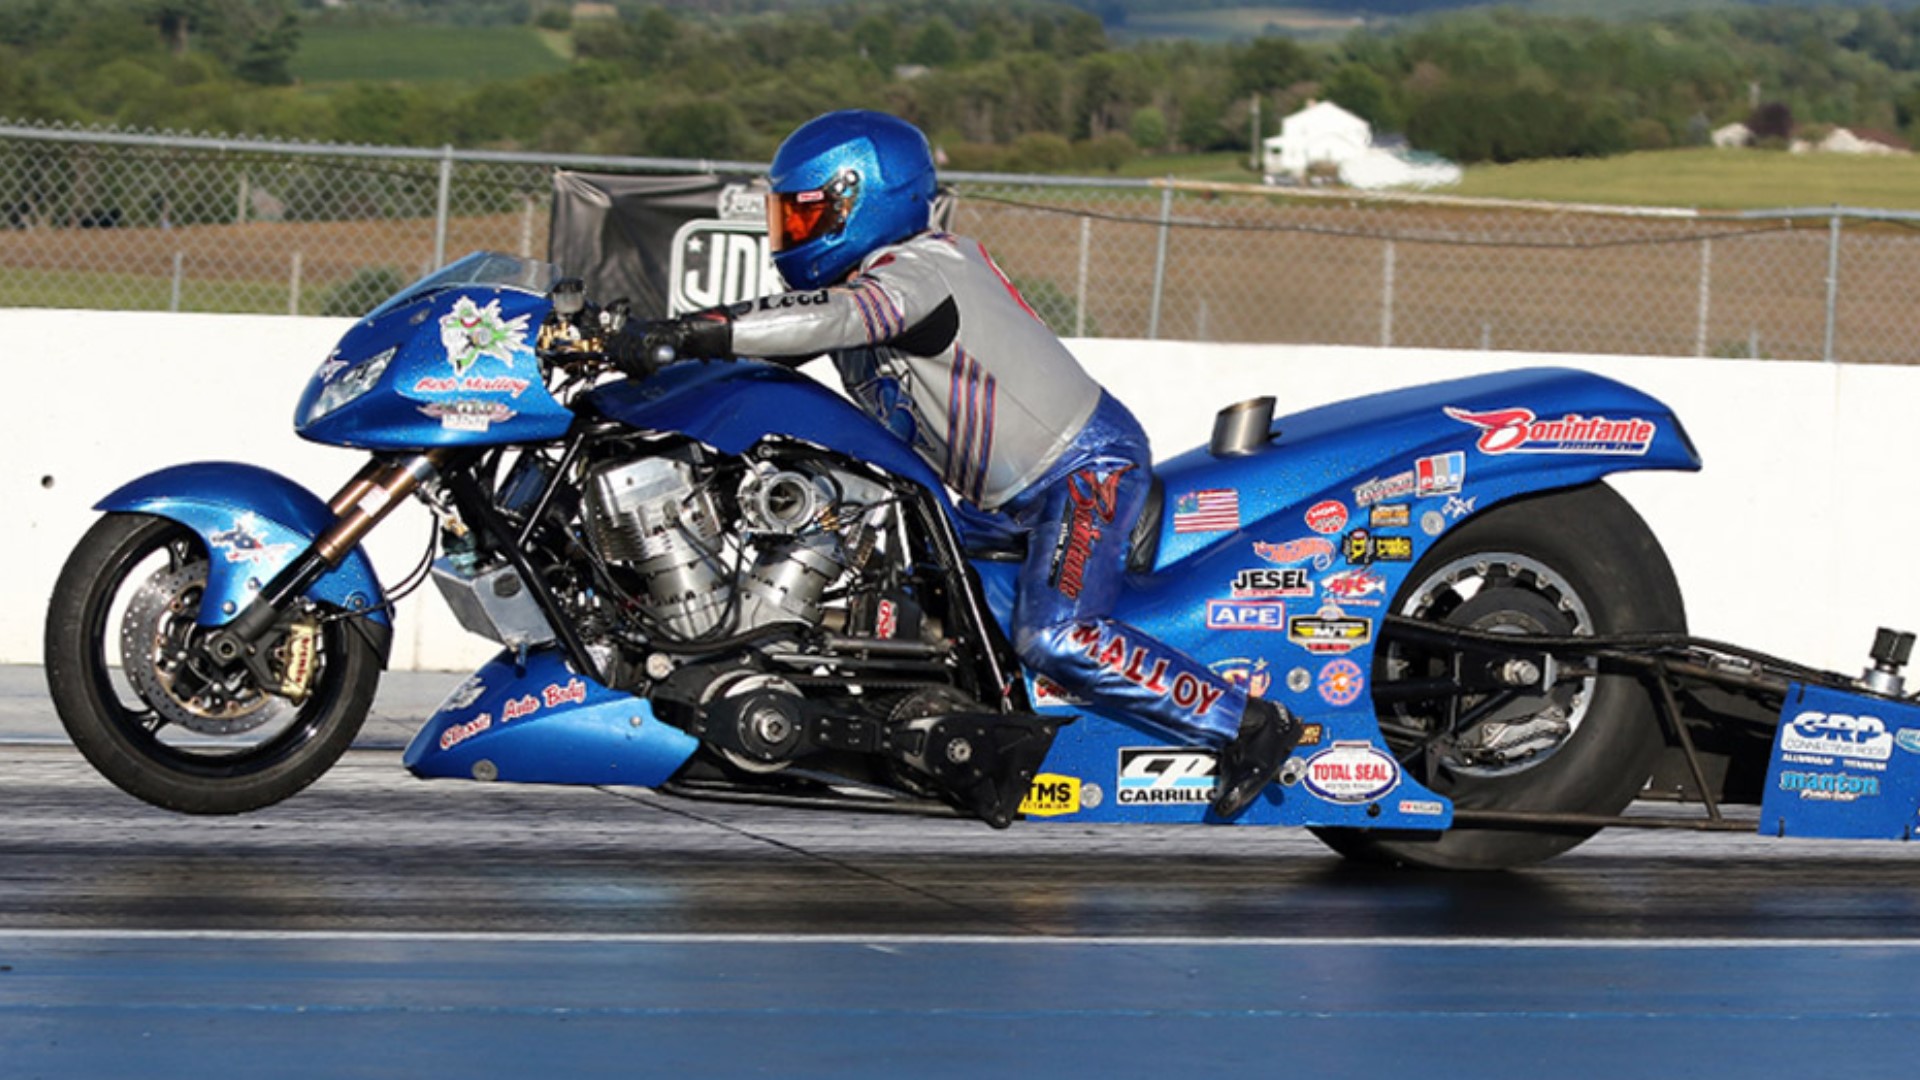 Rev up your engine! AHDRA all-American motorcycle drag racing | whas11.com